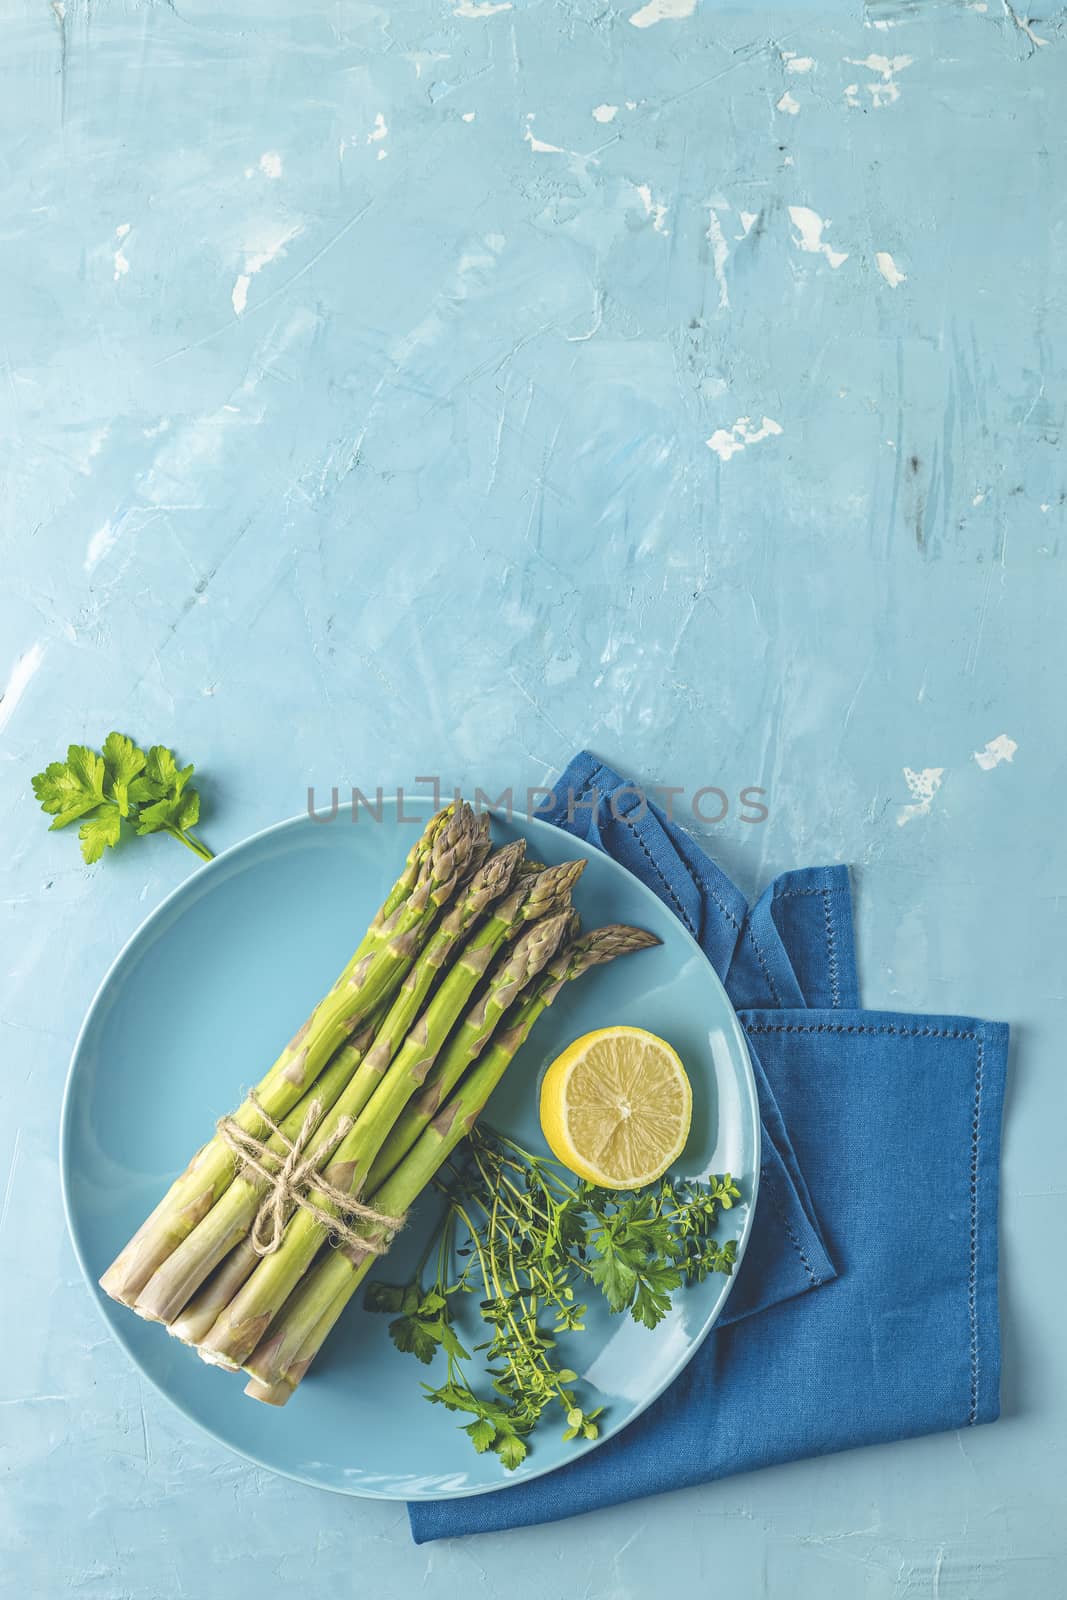 Fresh raw asparagus with lemon and parsley in blue ceramic plate with napkin on light blue concrete table surface. Healthy food background with copy space for you text.